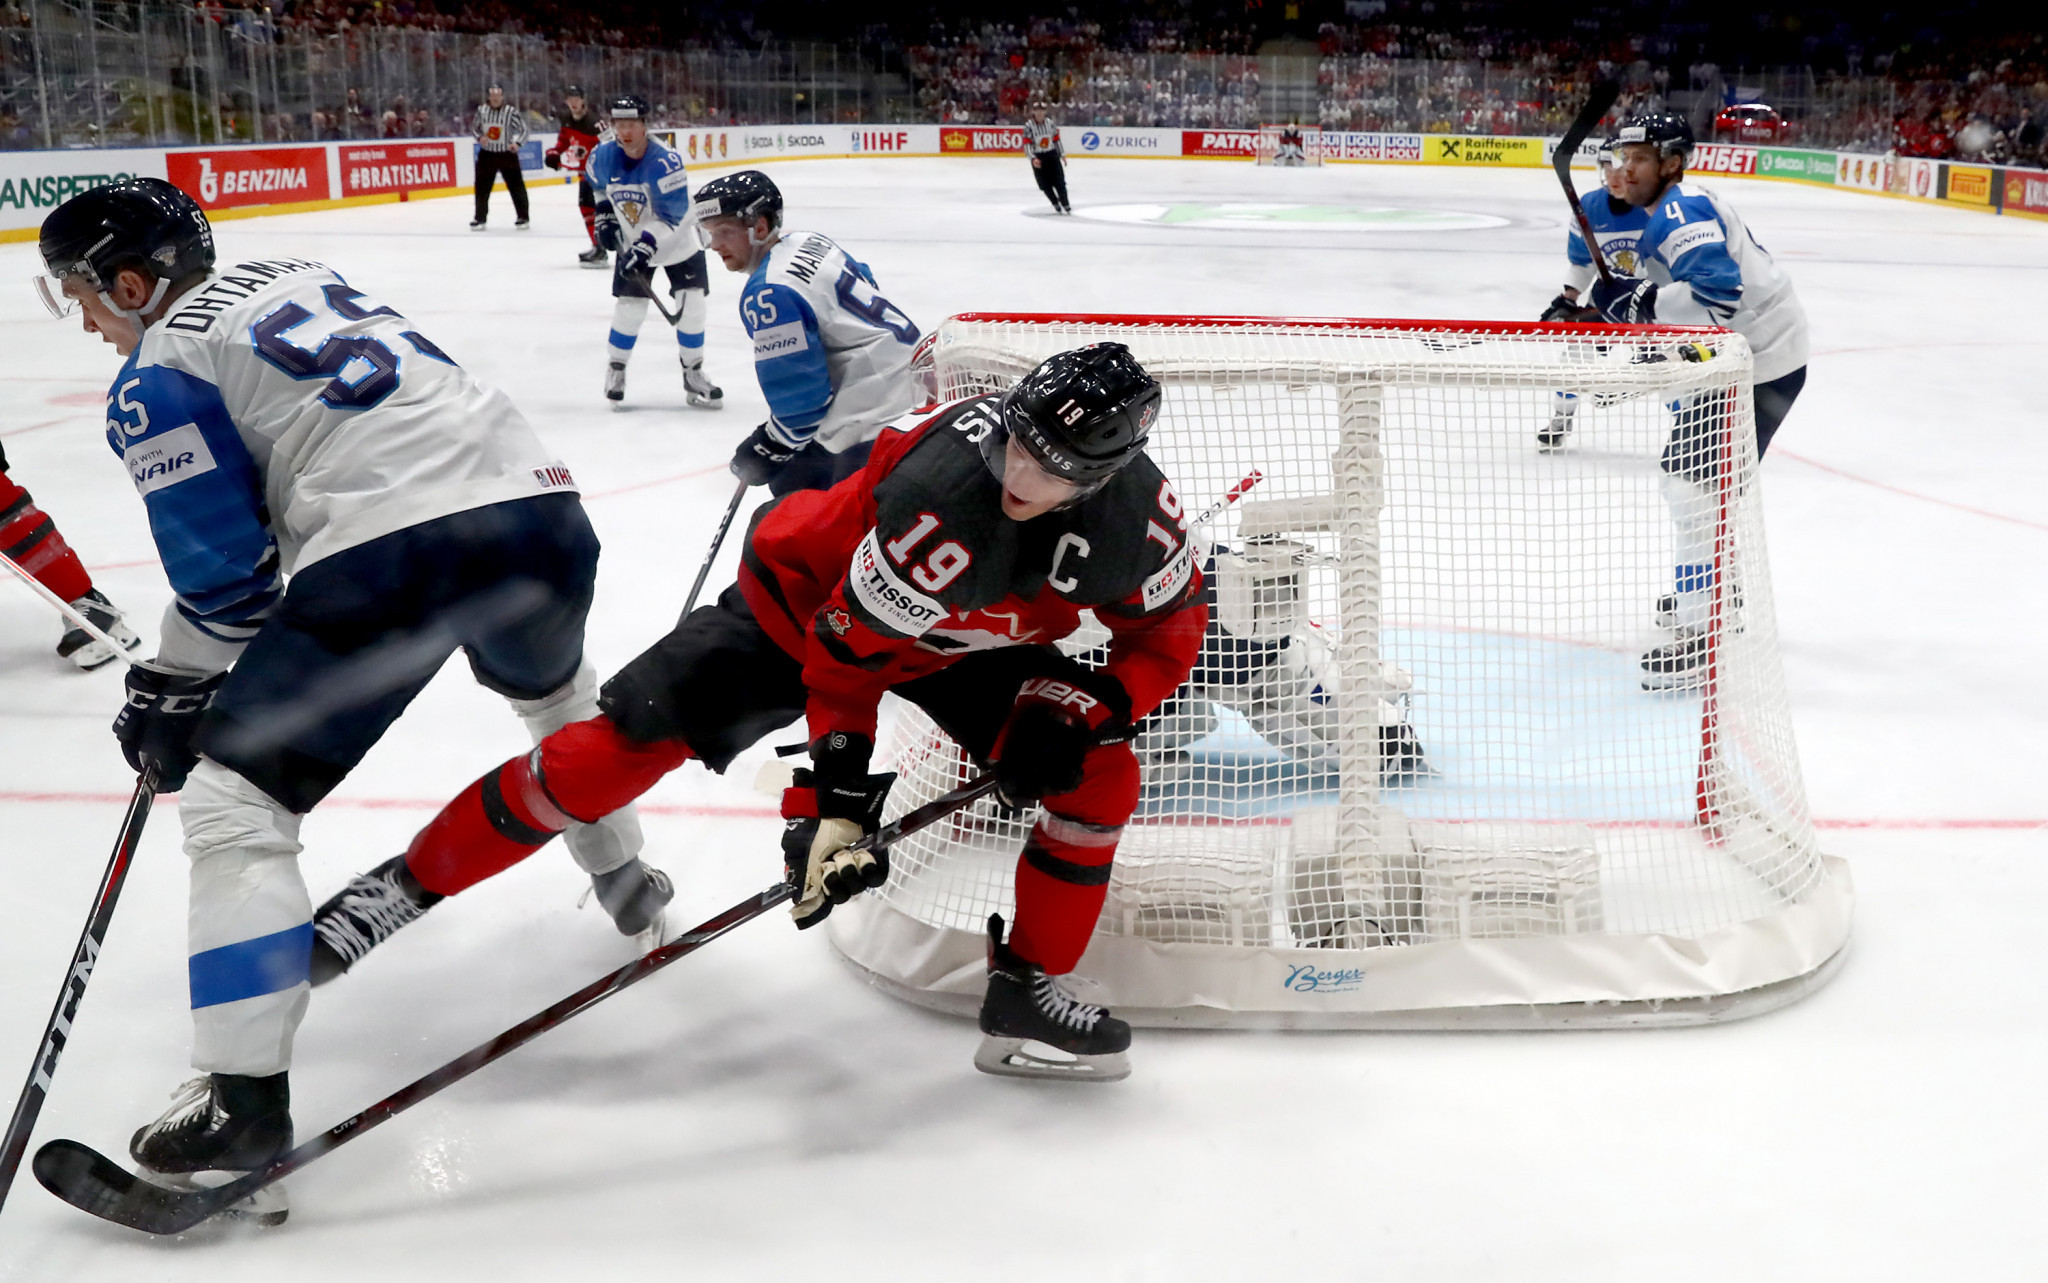 IIHF World Championship attracts combined TV audience of more than 1.6 billion